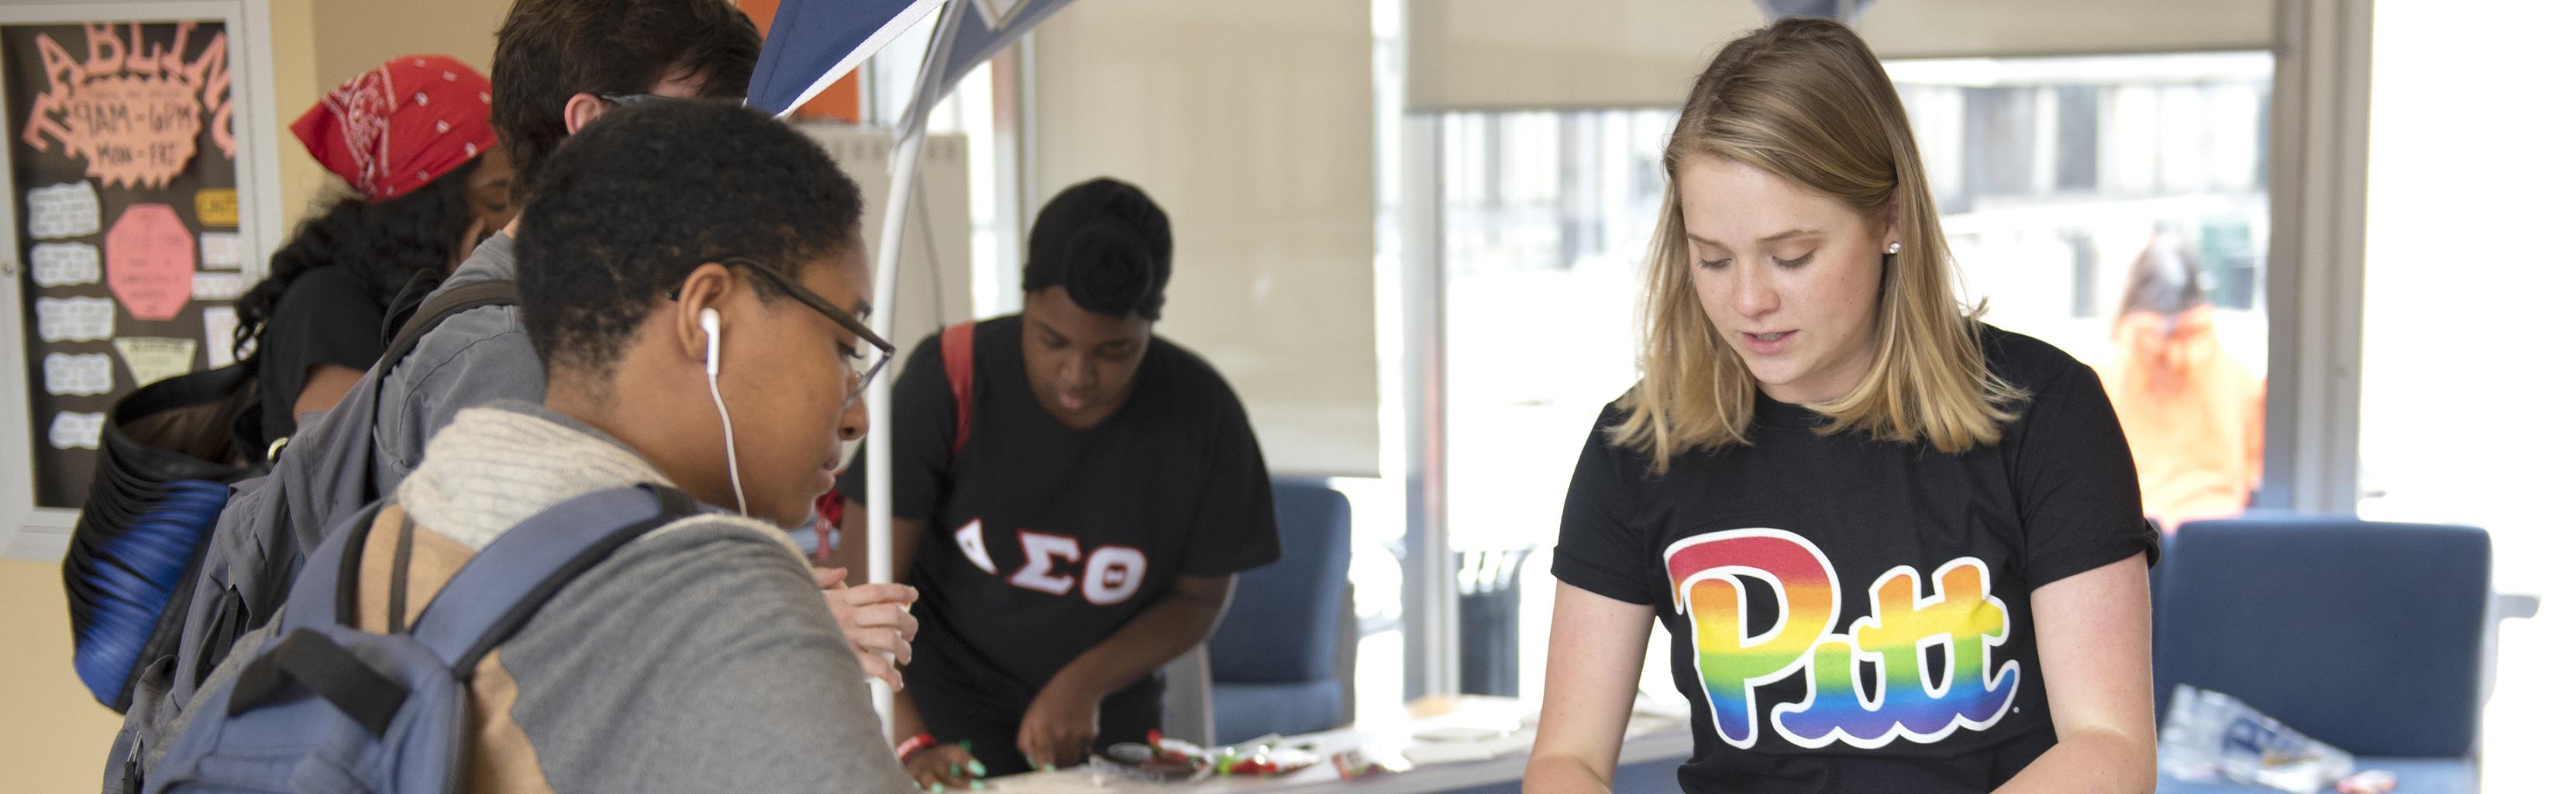 Students visit tabling event during Pride